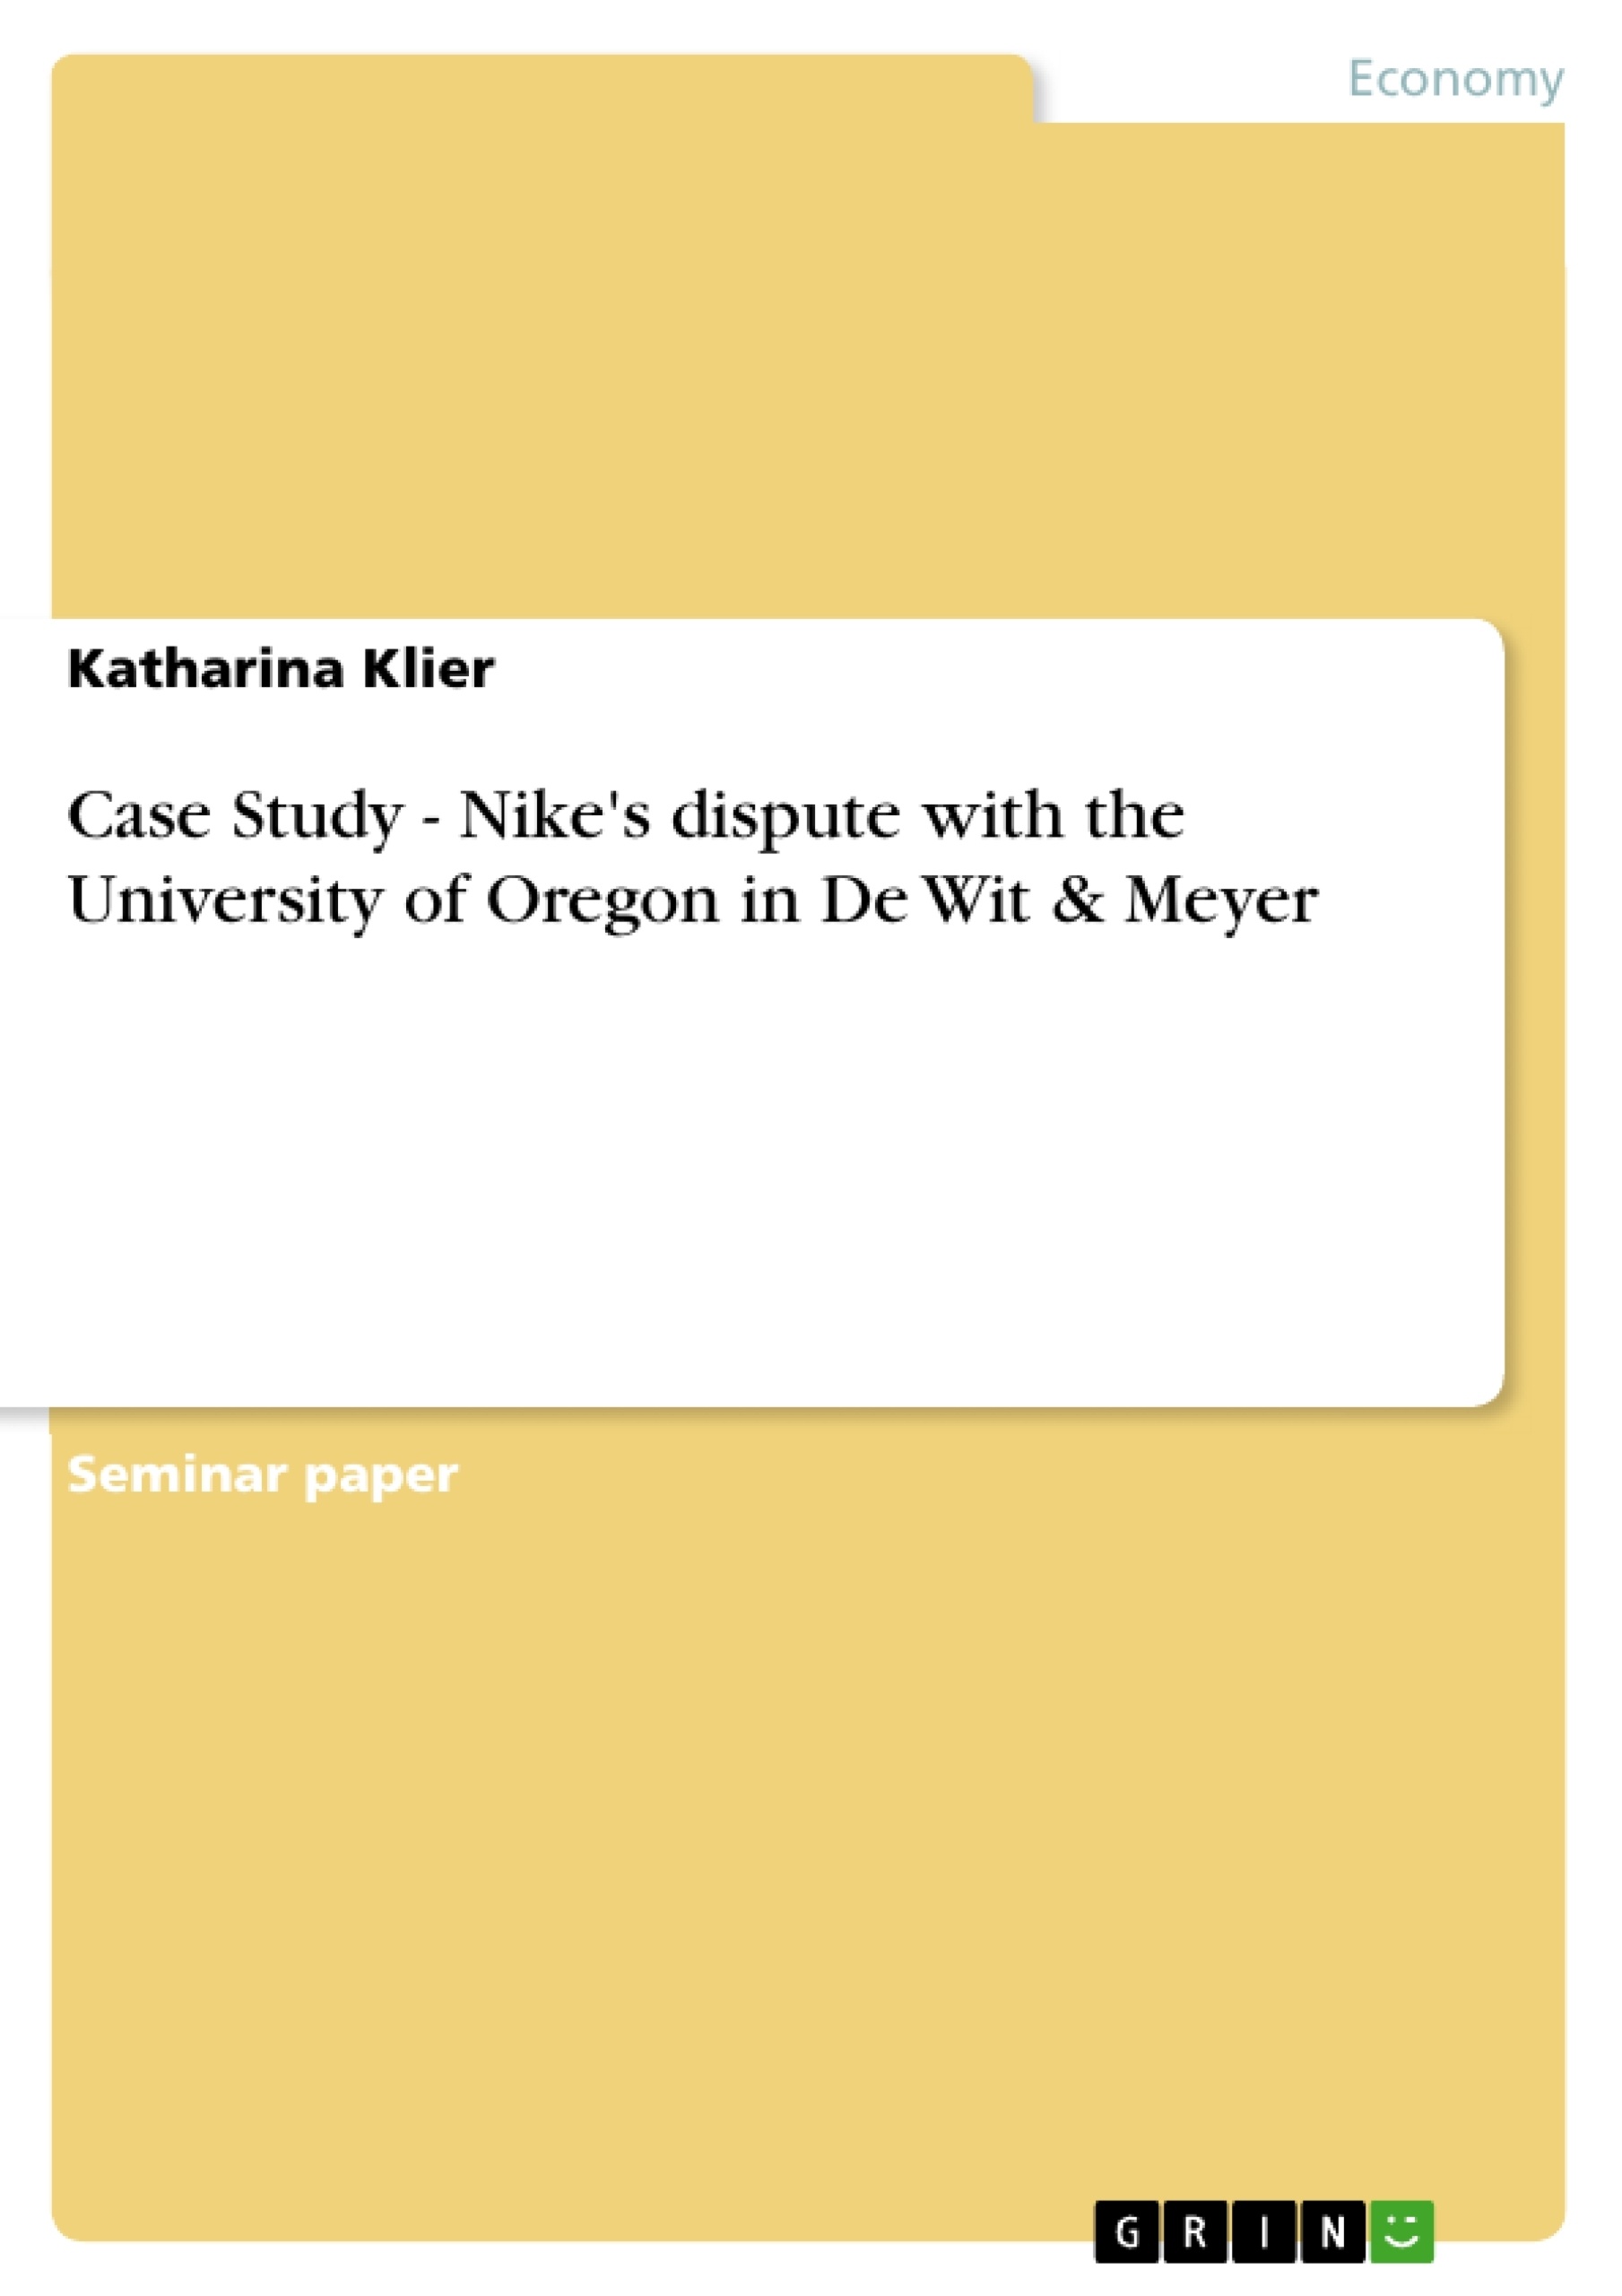 Título: Case Study - Nike's dispute with the University of Oregon in De Wit & Meyer